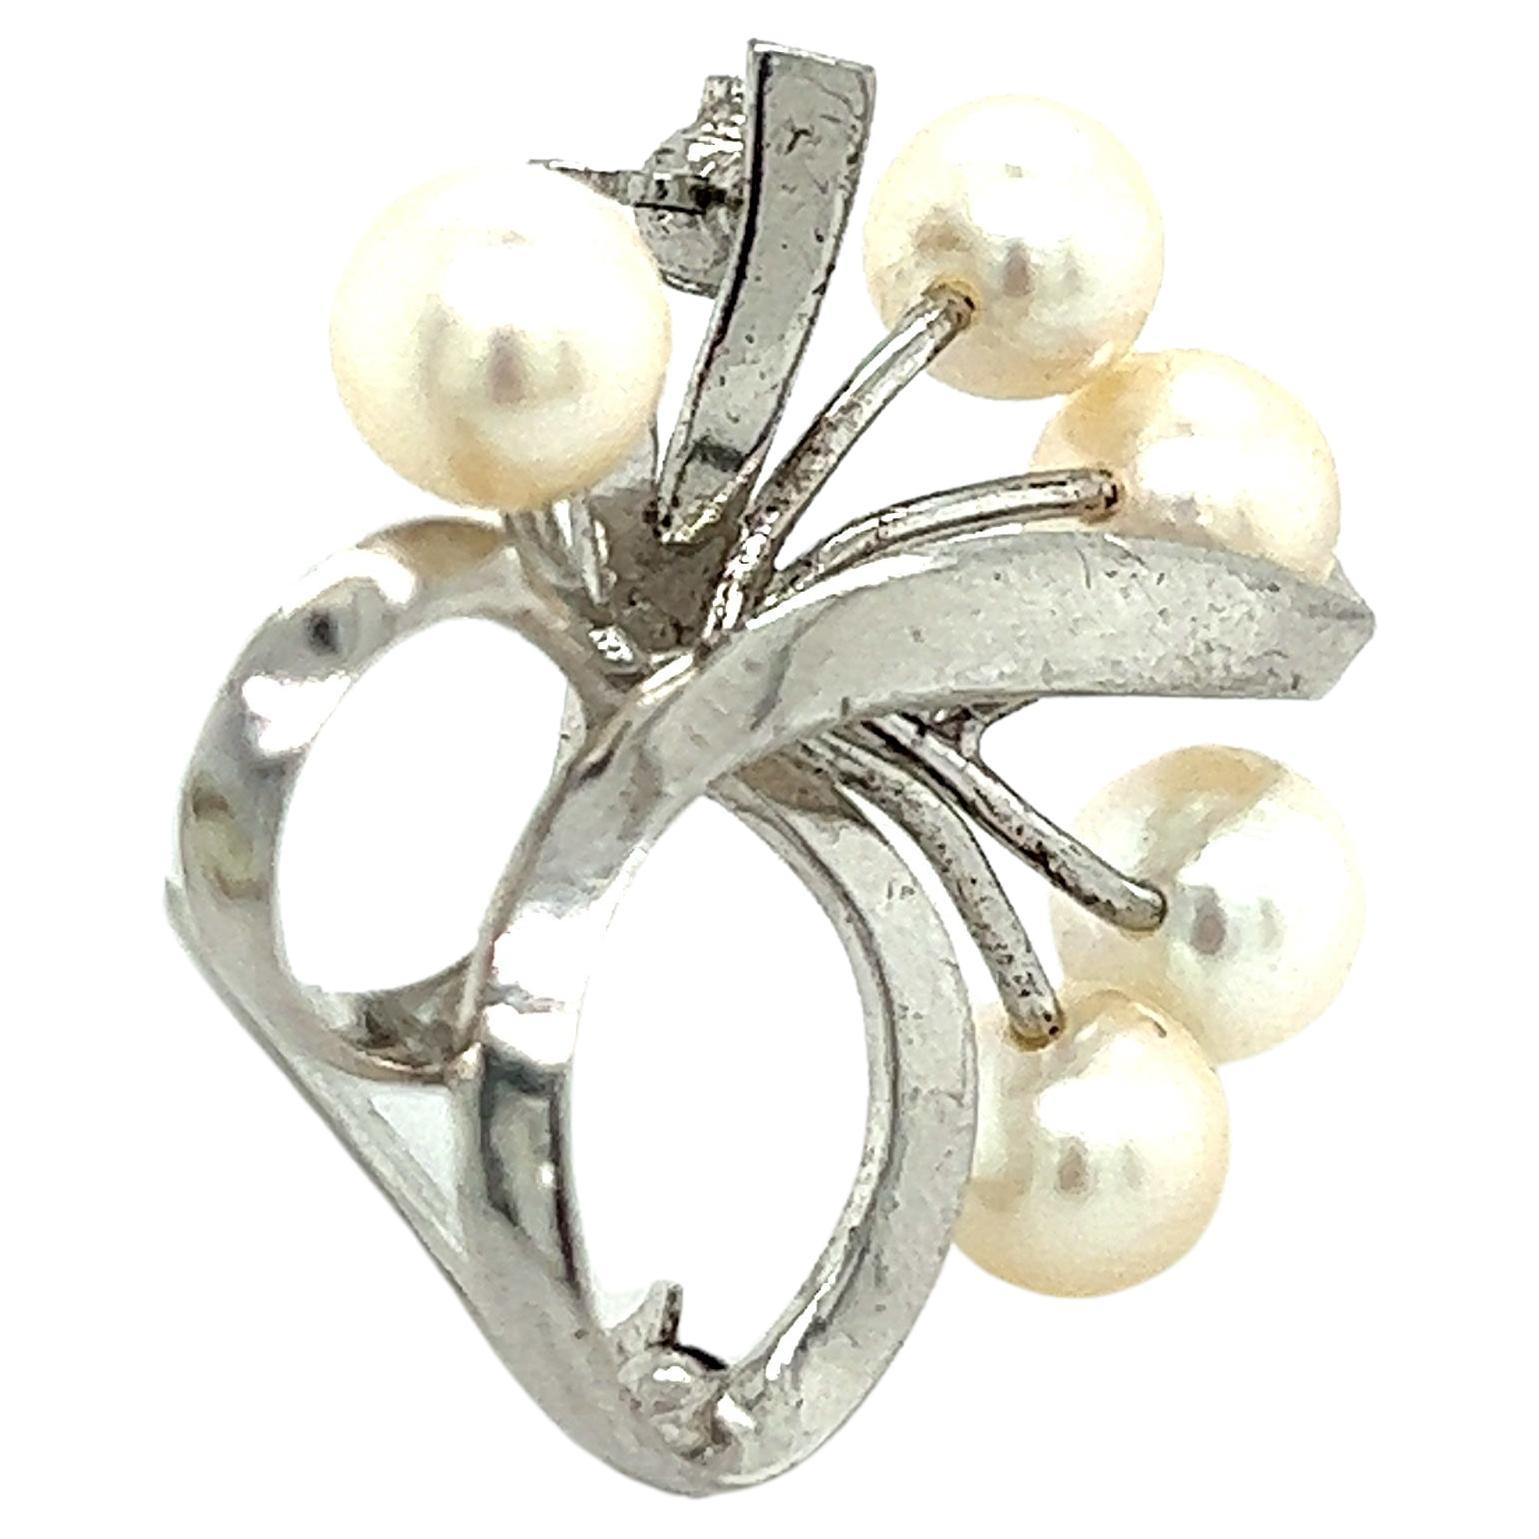 Mikimoto Estate Akoya Pearl Brooch Pin Sterling Silver 6.5 mm M300

This elegant Authentic Mikimoto Estate sterling silver brooch pin has 5 Saltwater Akoya Cultured Pearls in of 6.5 mm and have a weight of 5.09 Grams.

TRUSTED SELLER SINCE